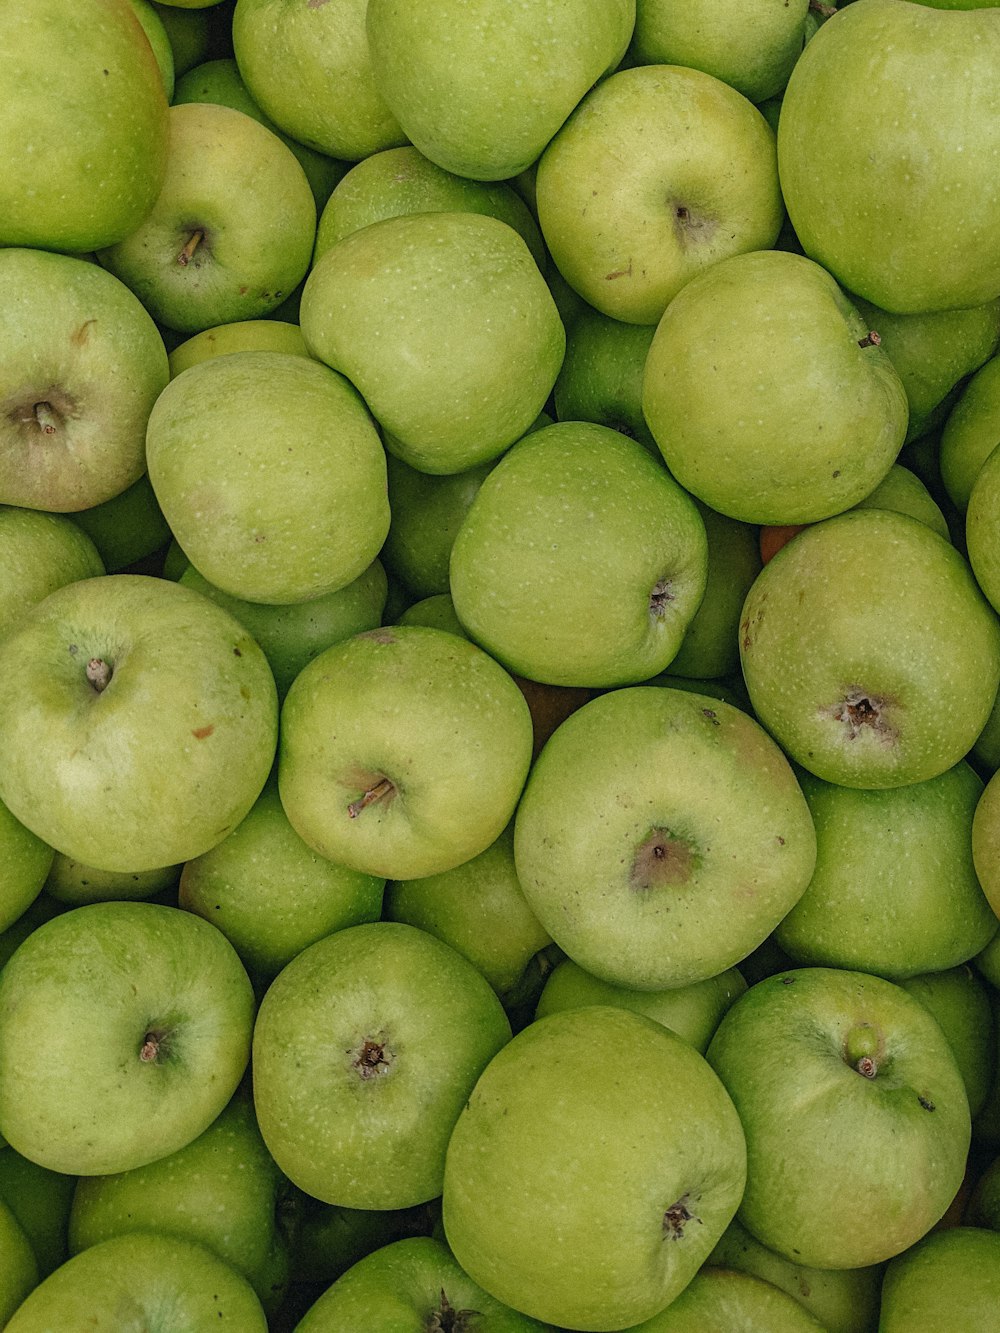 a pile of green apples